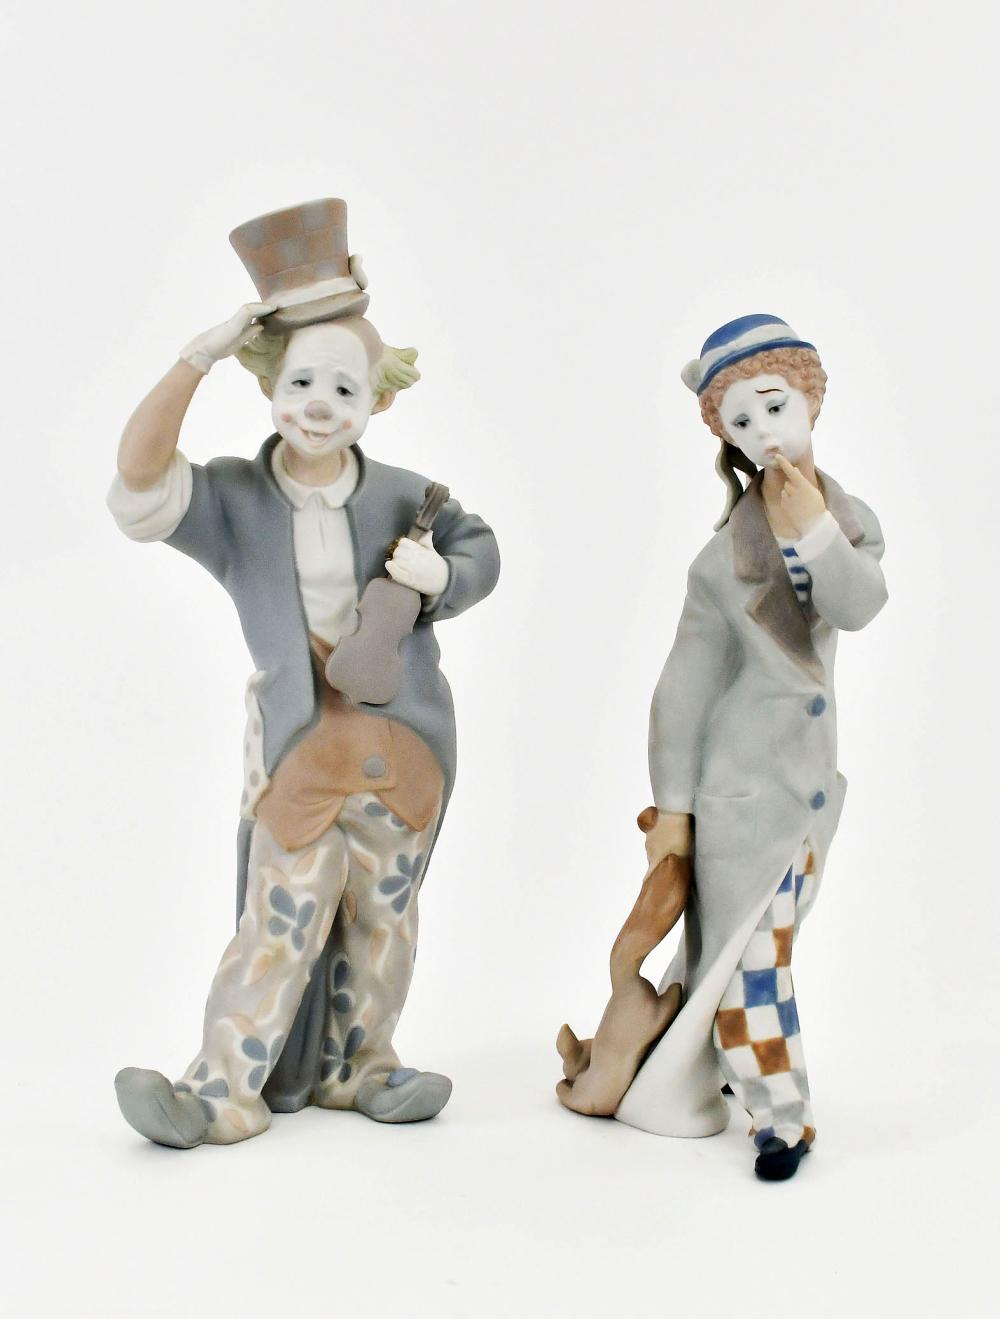 TWO LLADRO PORCELAIN FIGURES OF